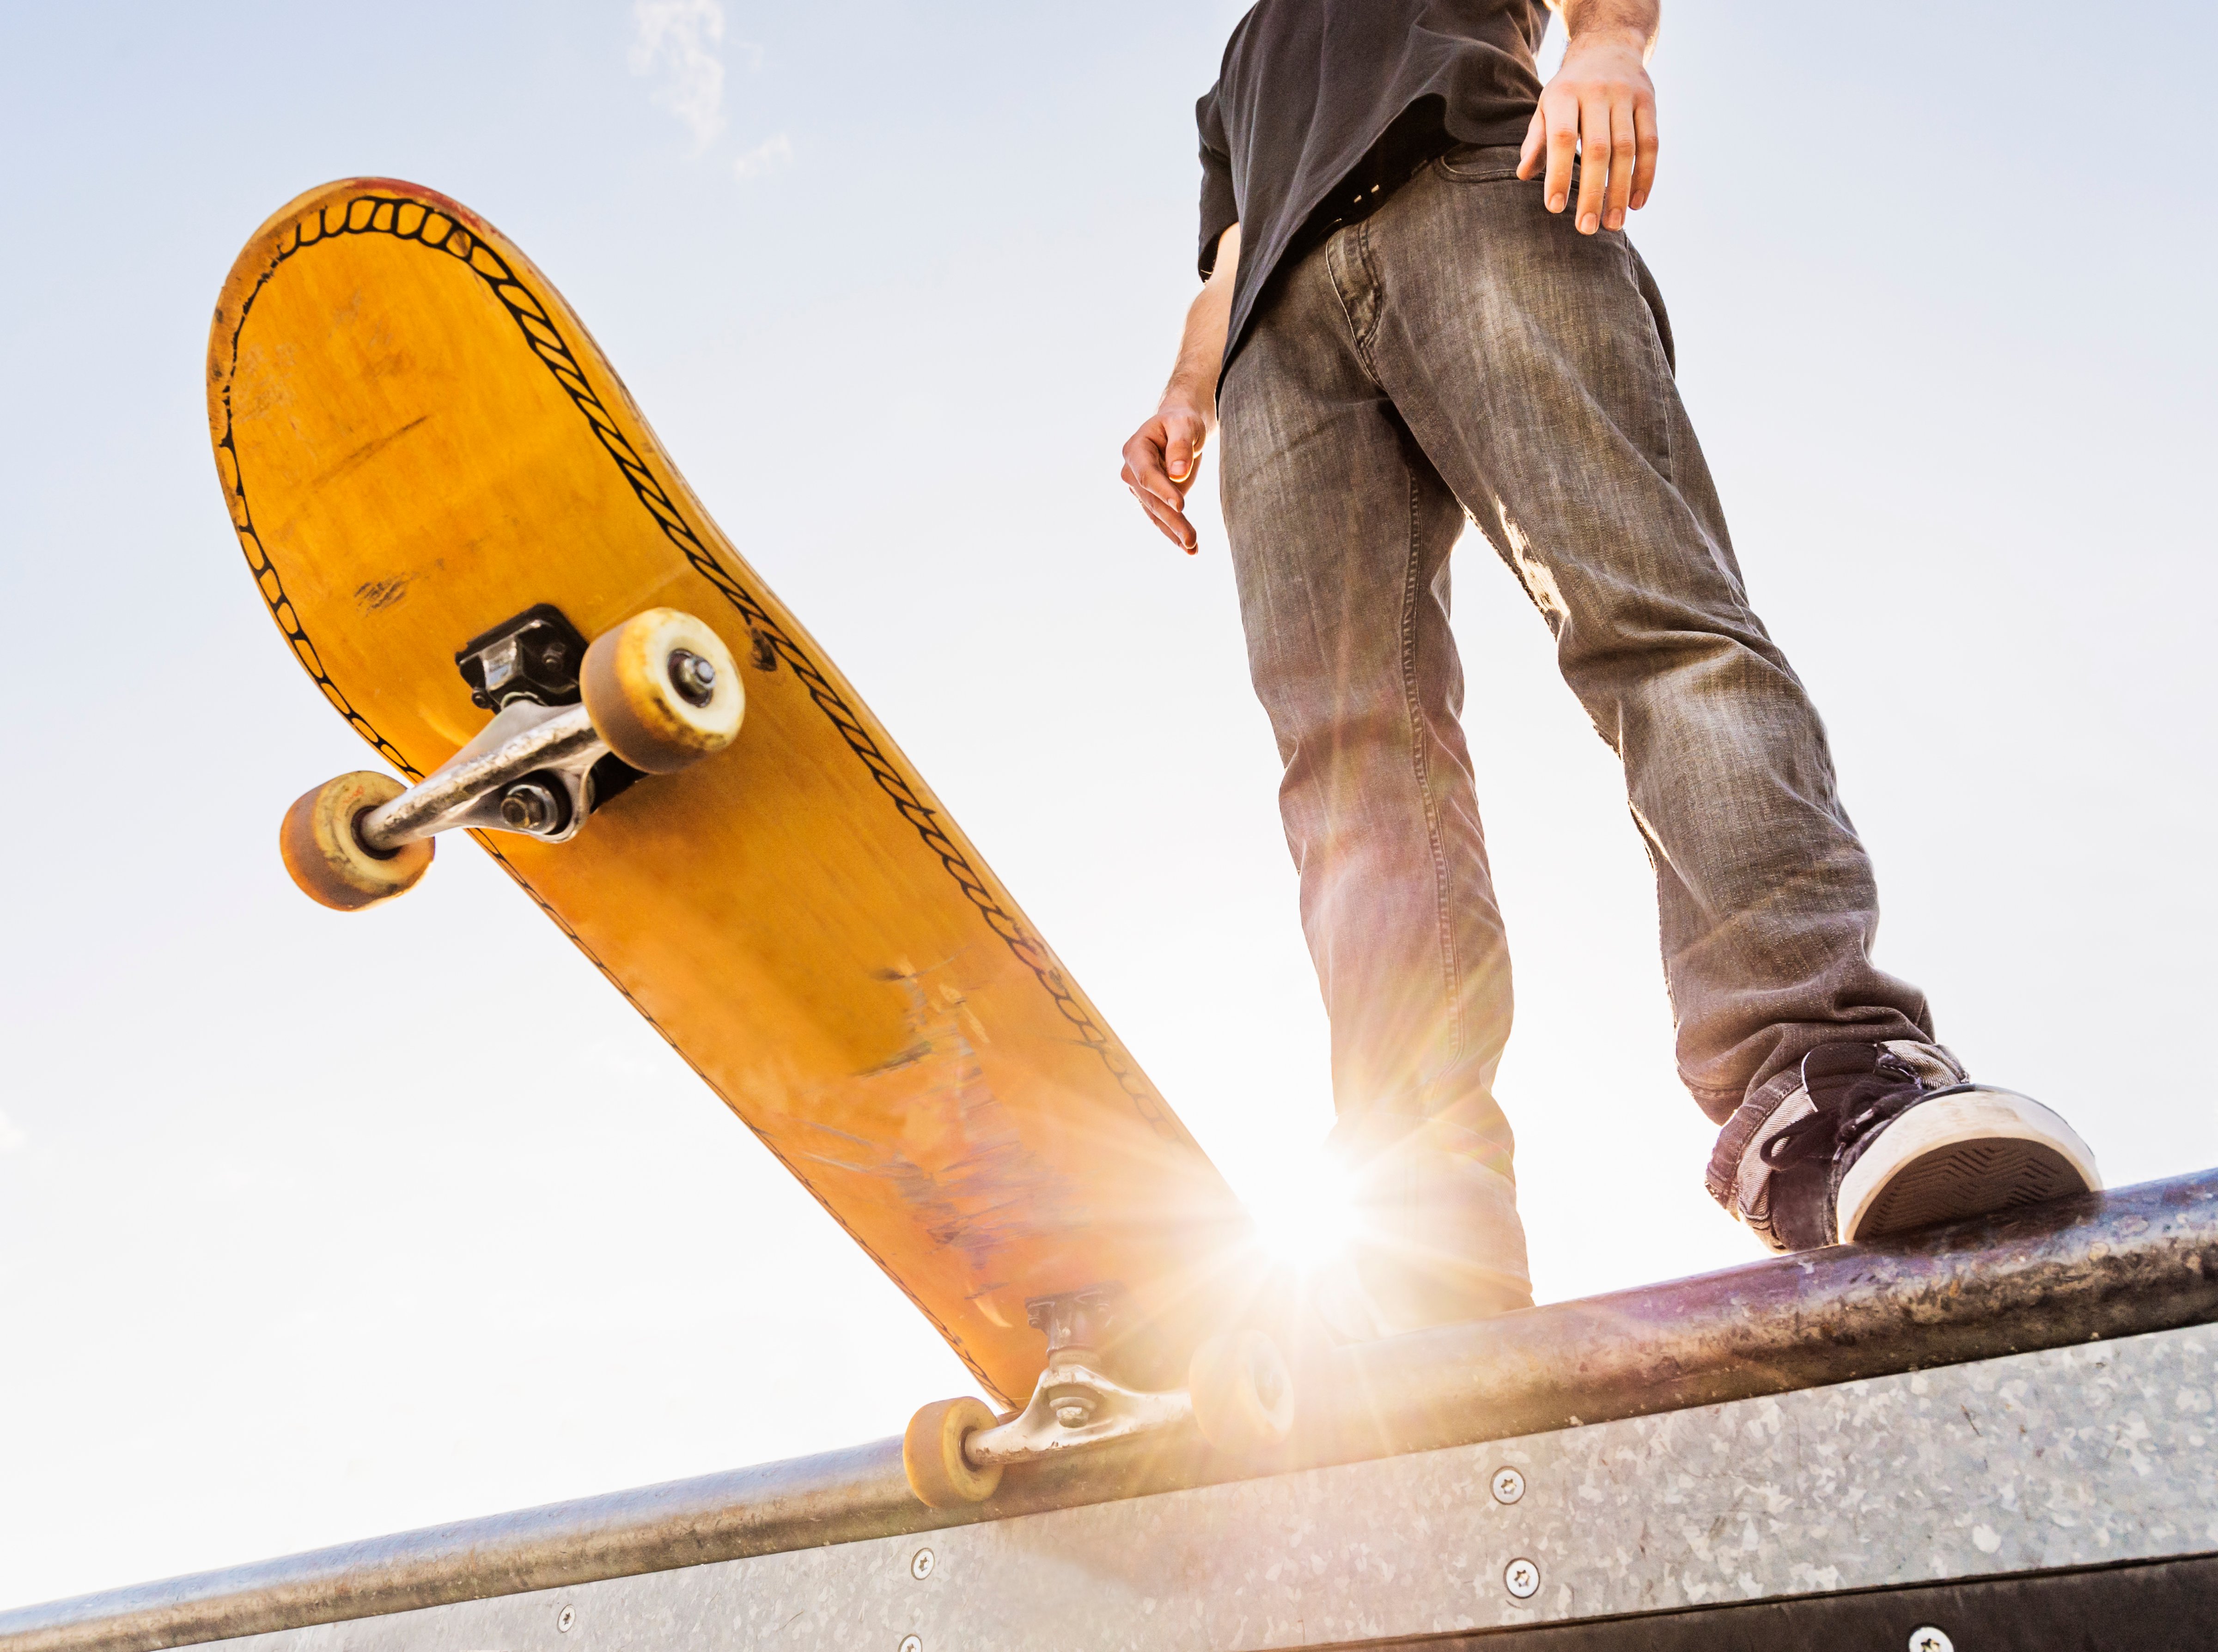 Man with skateboard at the edge of ramp (Daniel Grill&mdash;Getty Images/Tetra images RF)